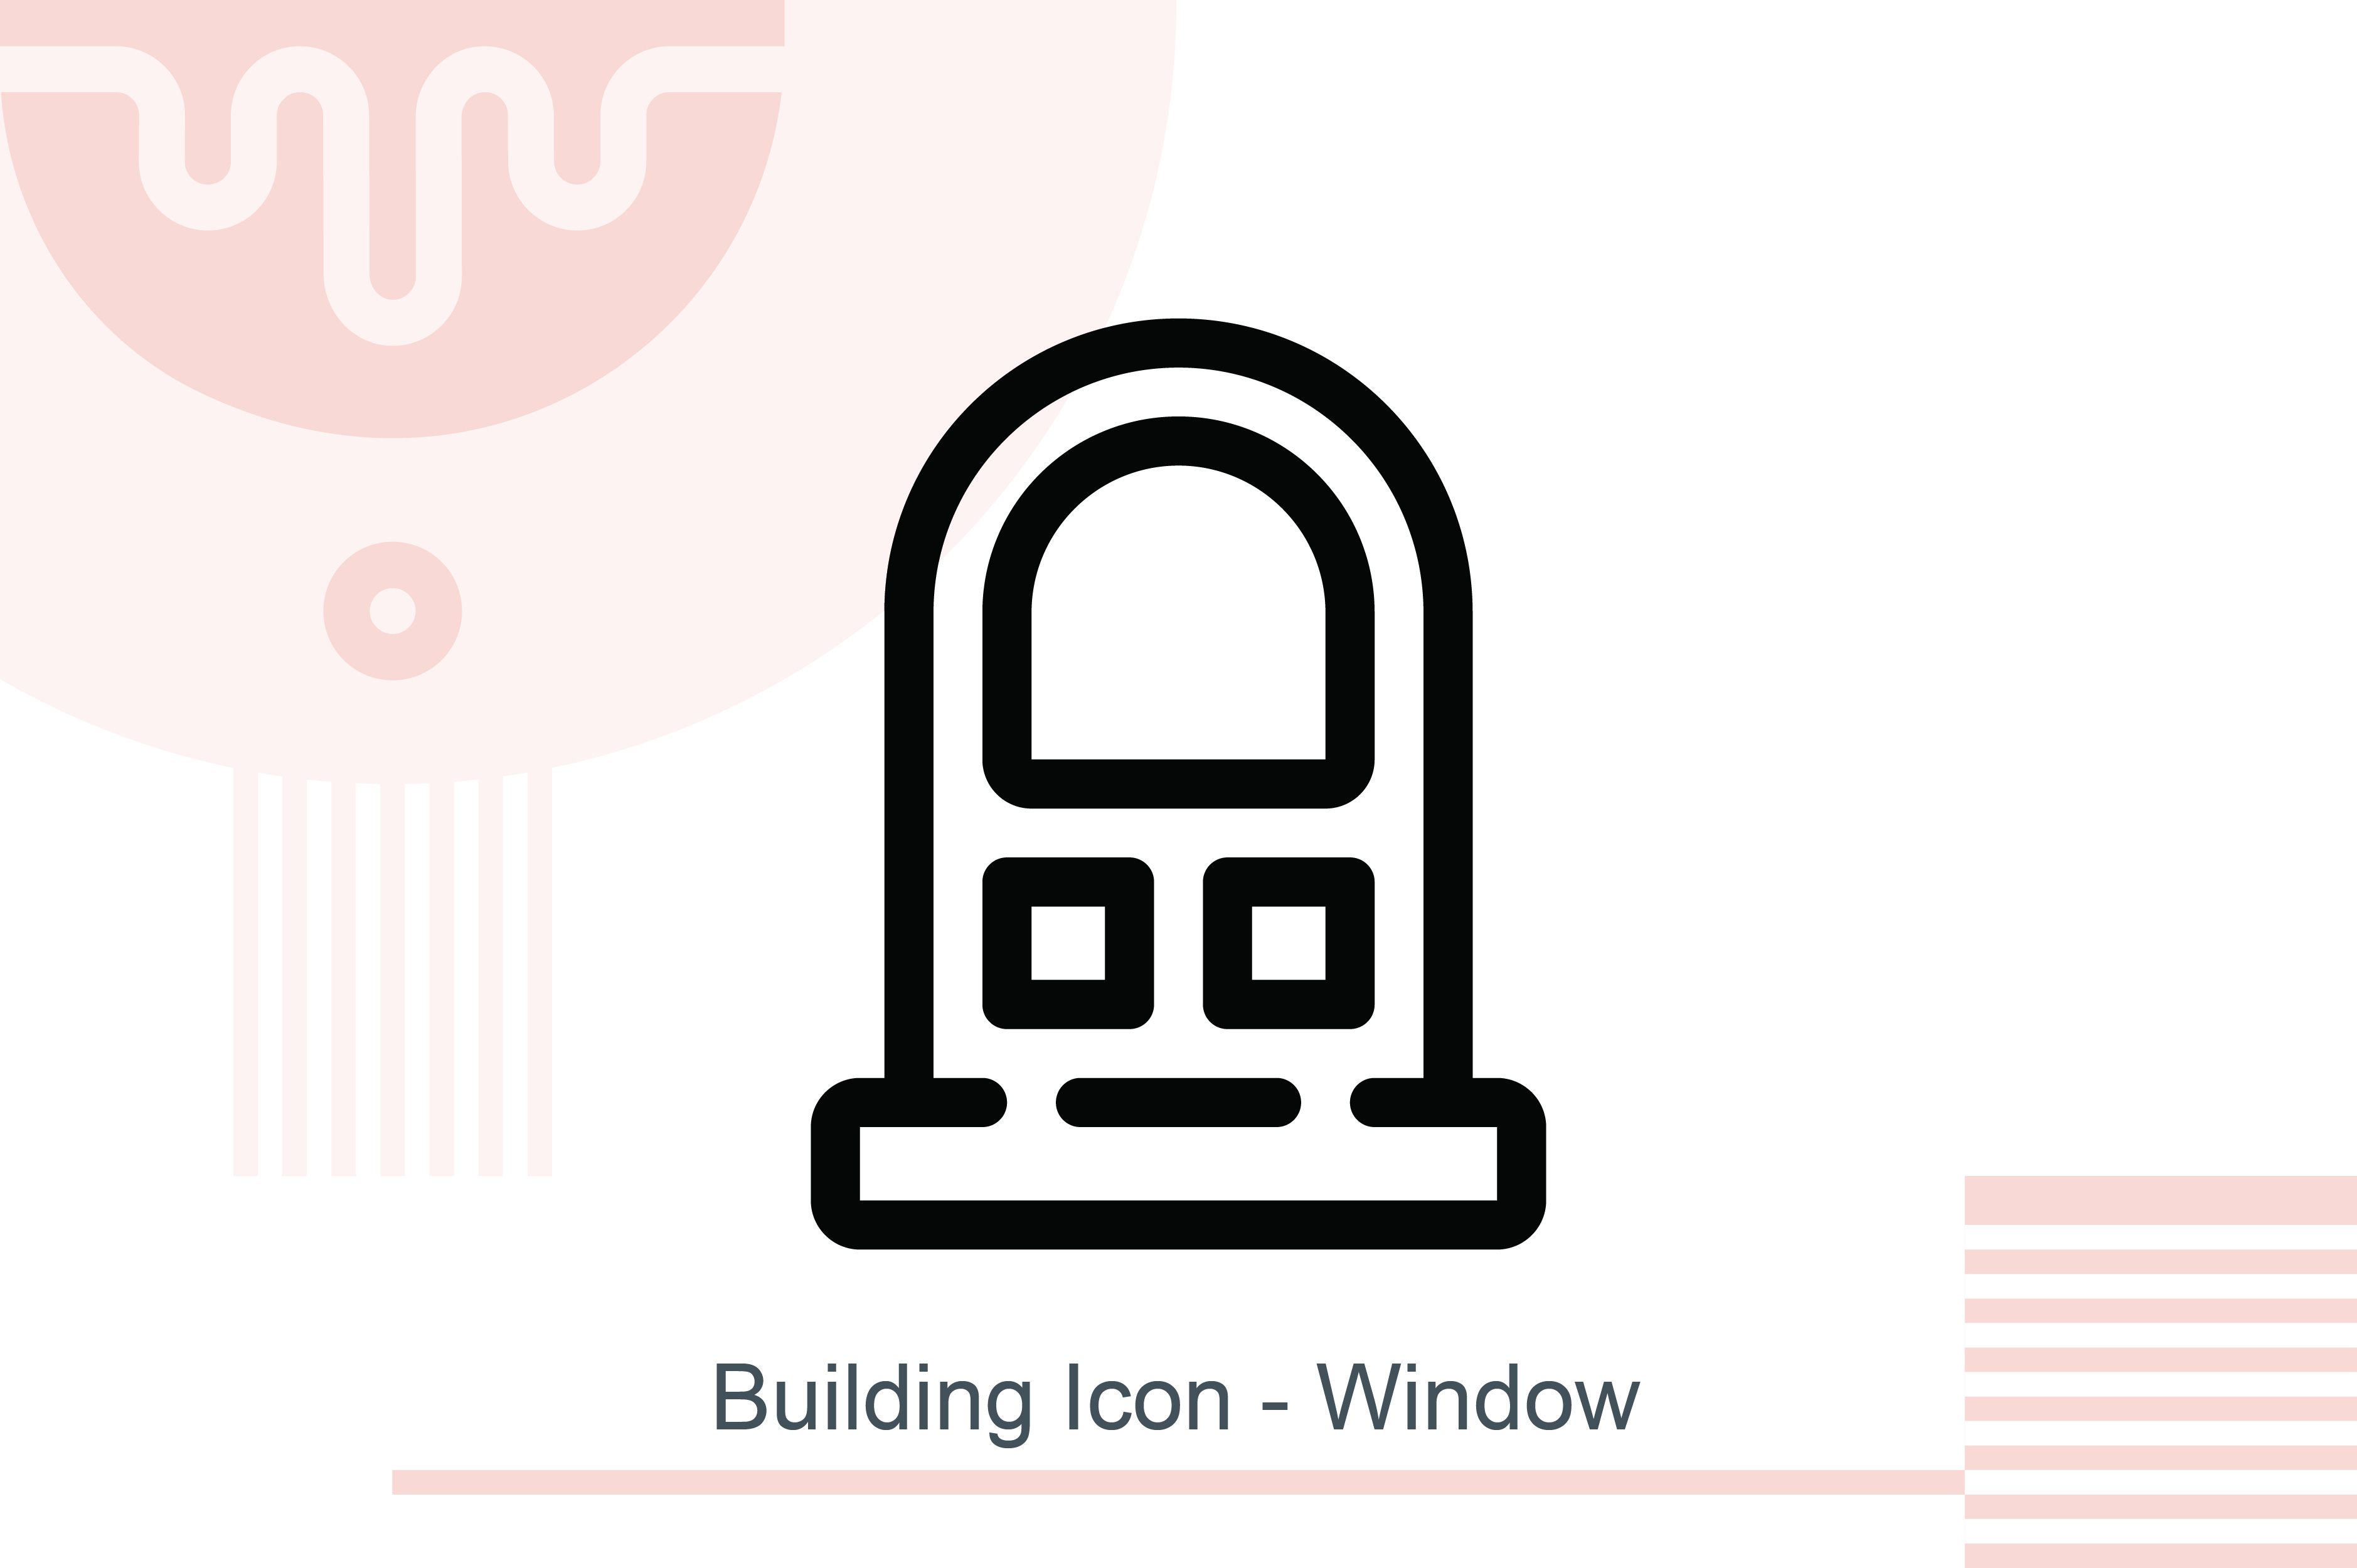 Download Building Icon Window Graphic By Melindagency Creative Fabrica PSD Mockup Templates